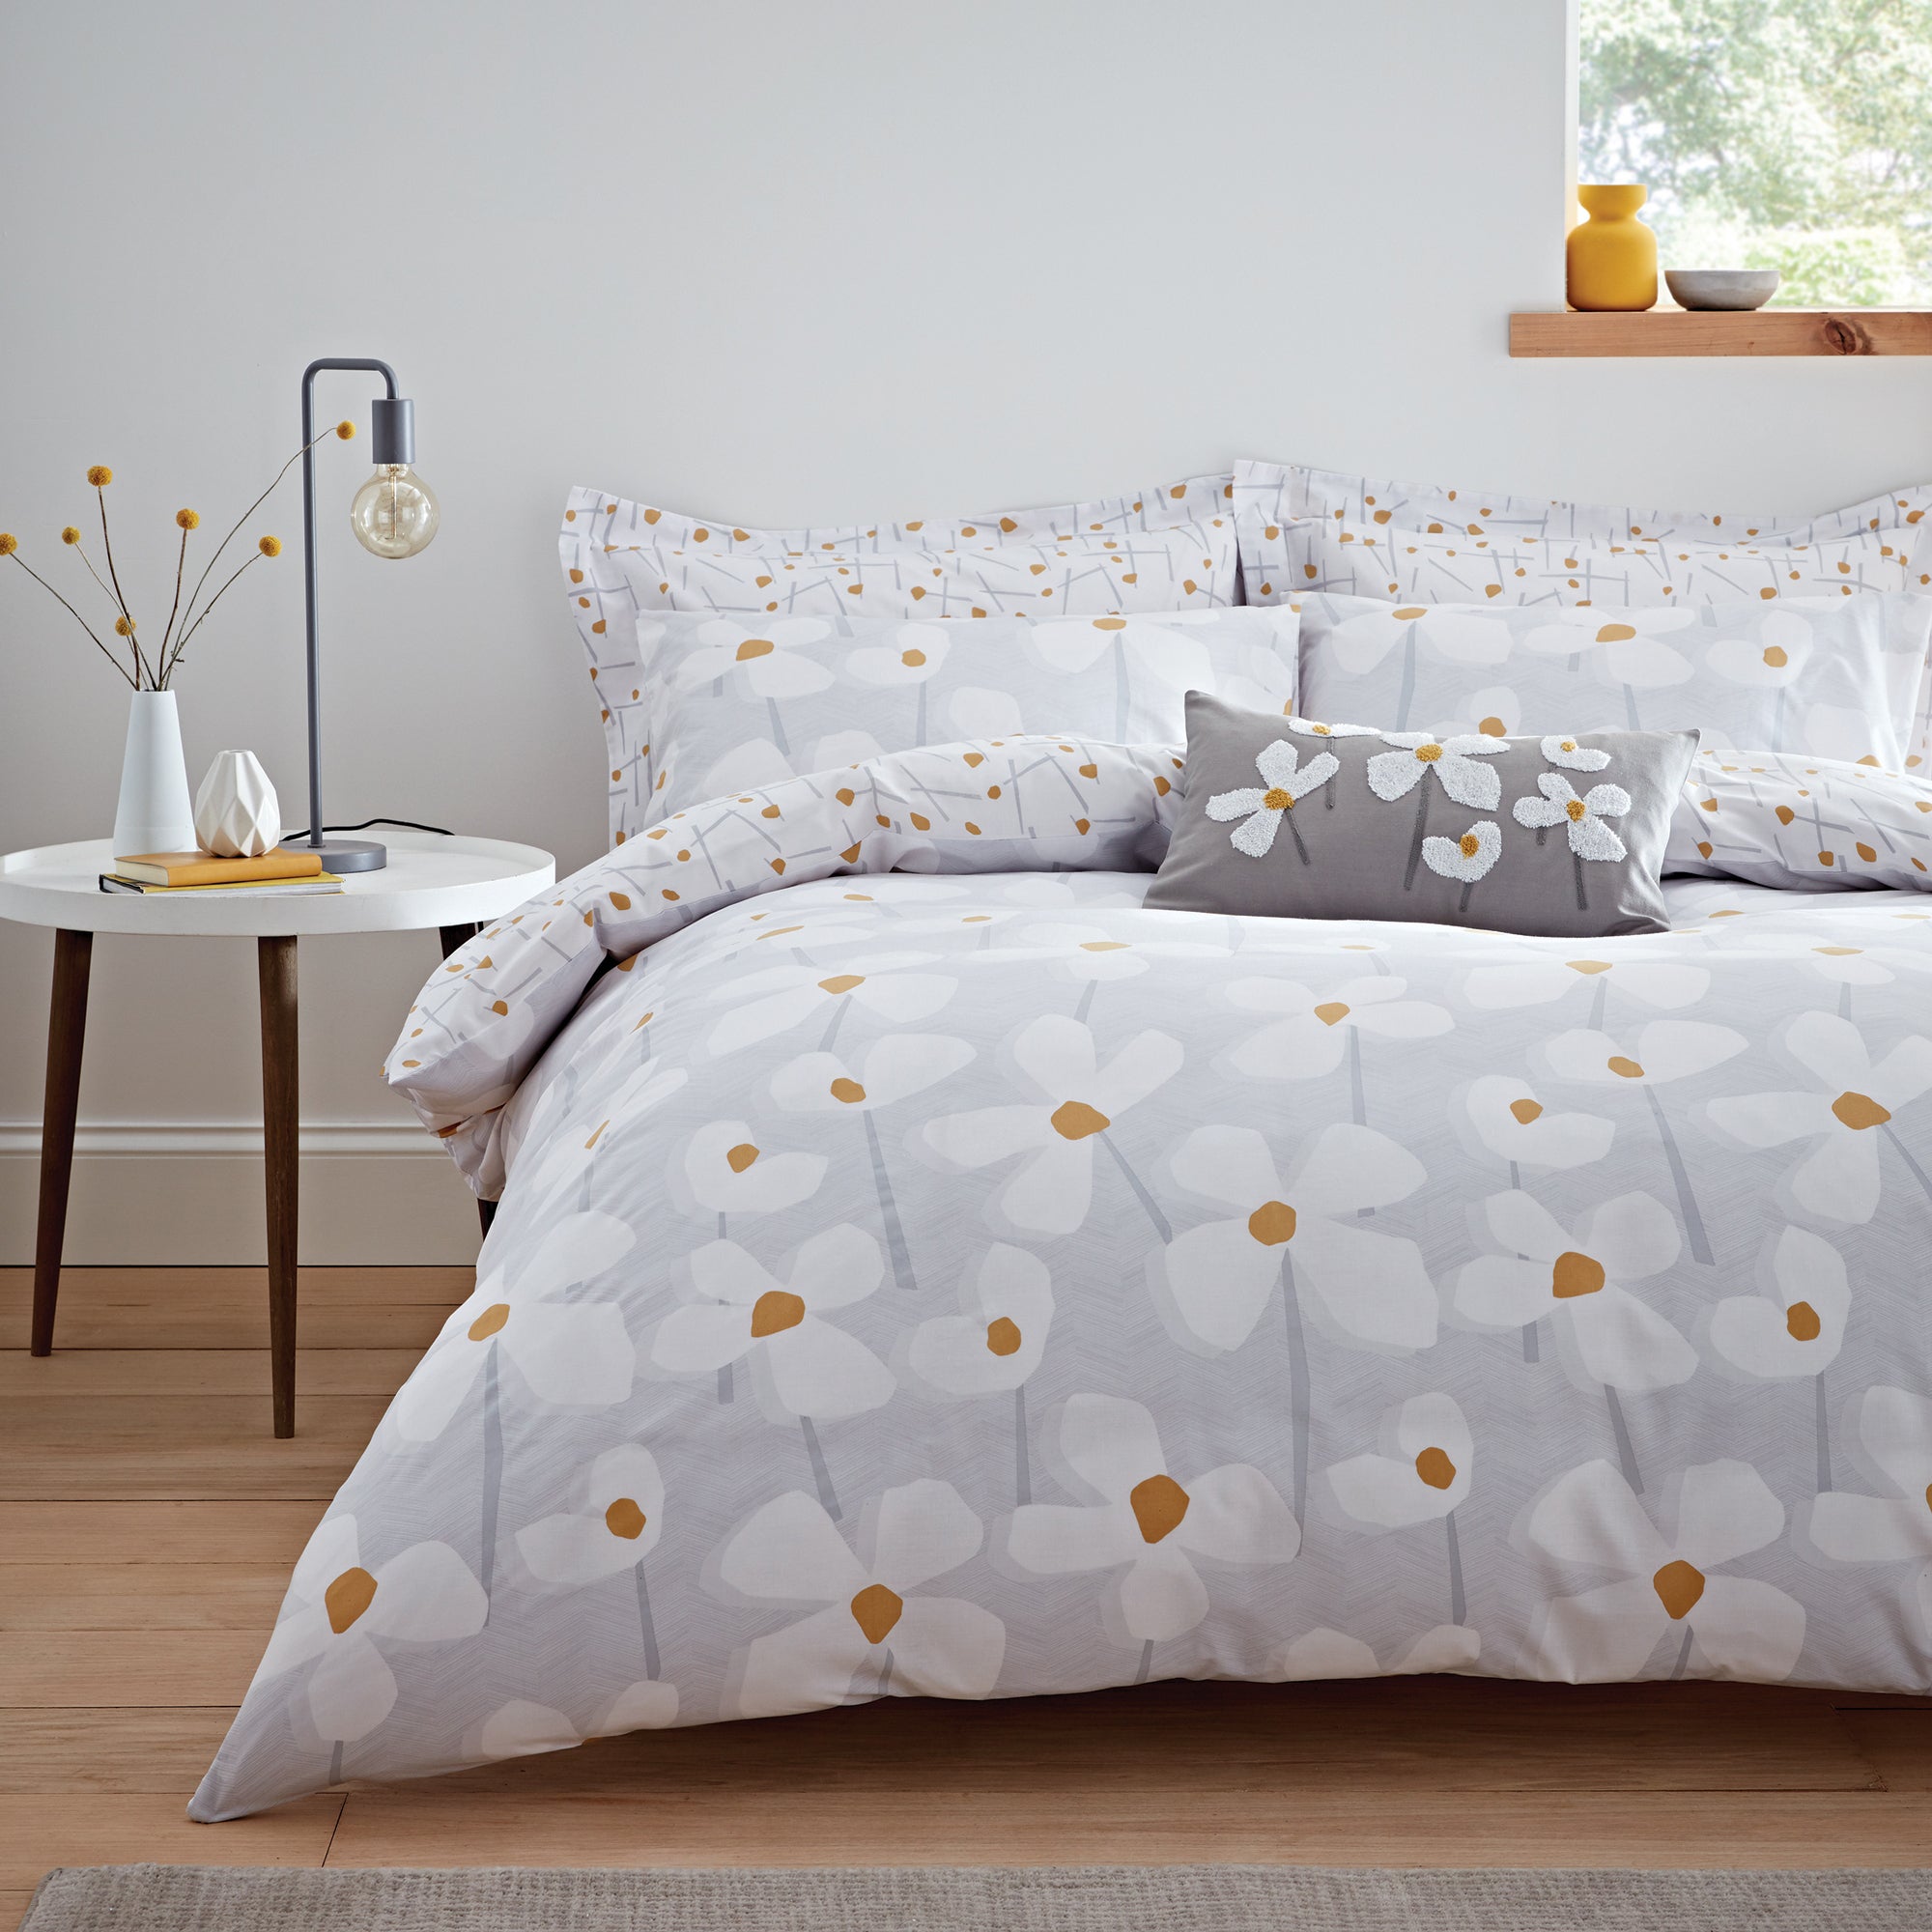 Elements Lena Reversible Grey Duvet Cover And Pillowcase Set Grey Yellow And White